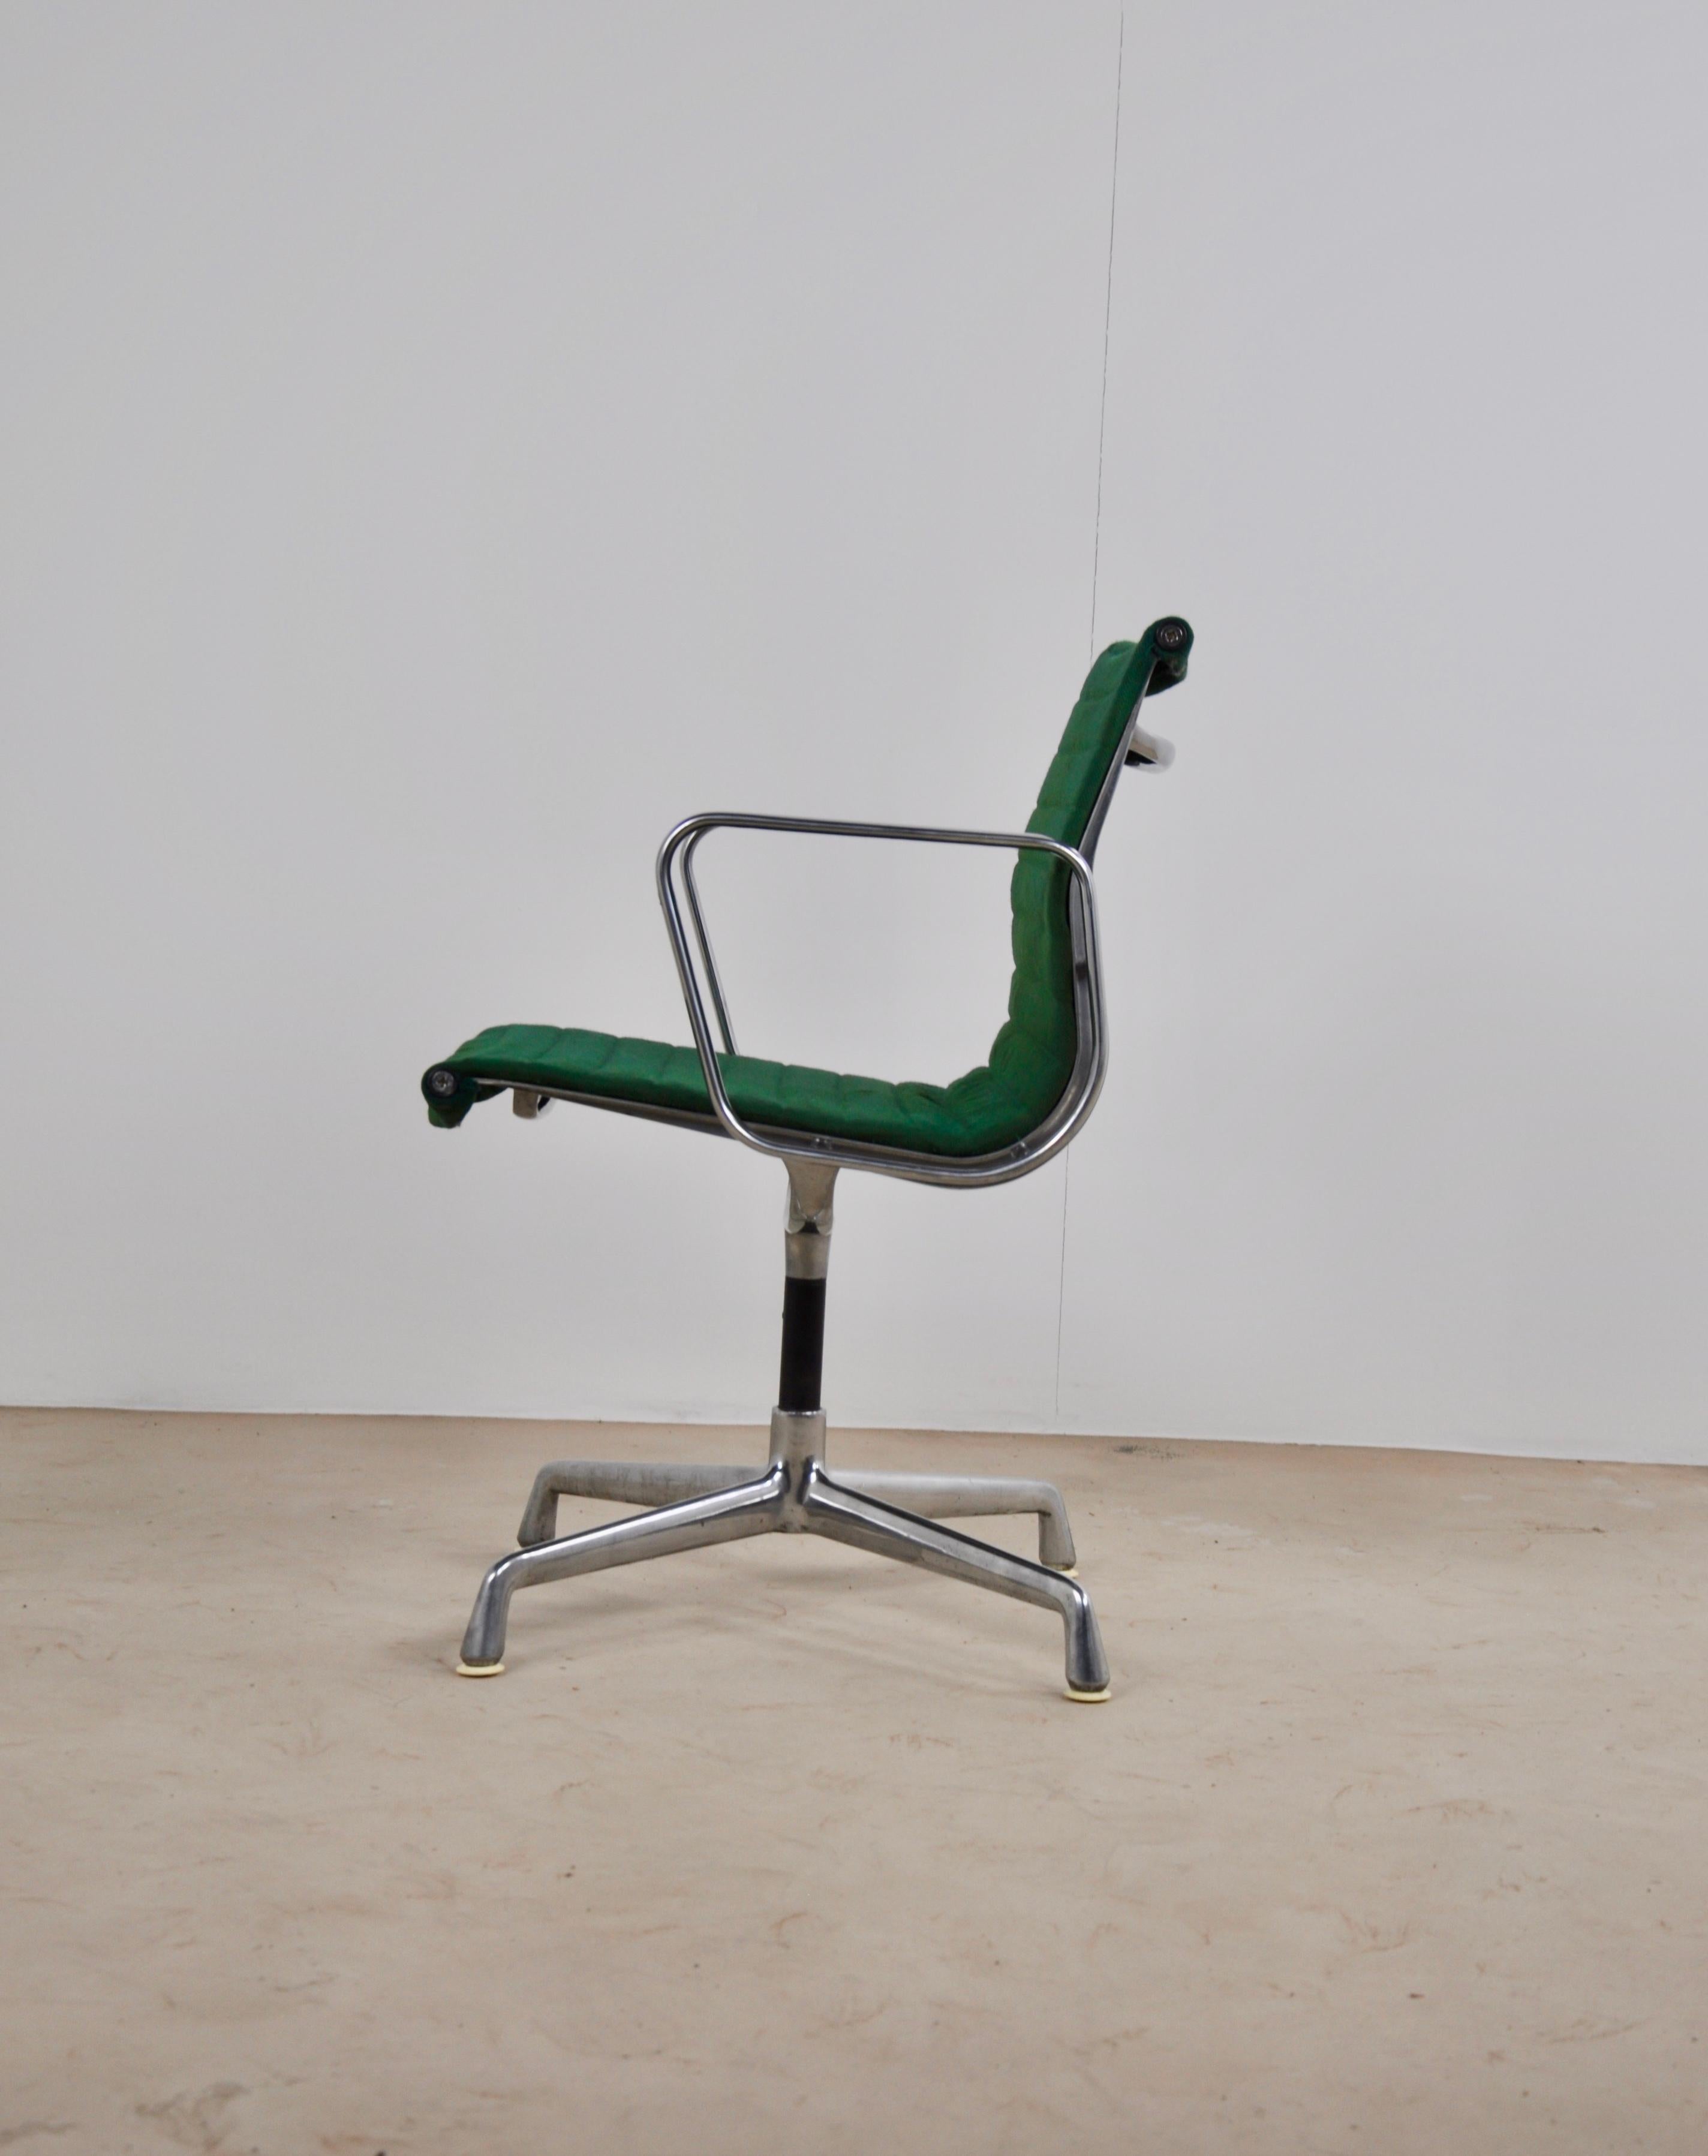 Mid-20th Century Green Office Armchair by Charles &Ray Eames for Herman Miller ICF, 1960s